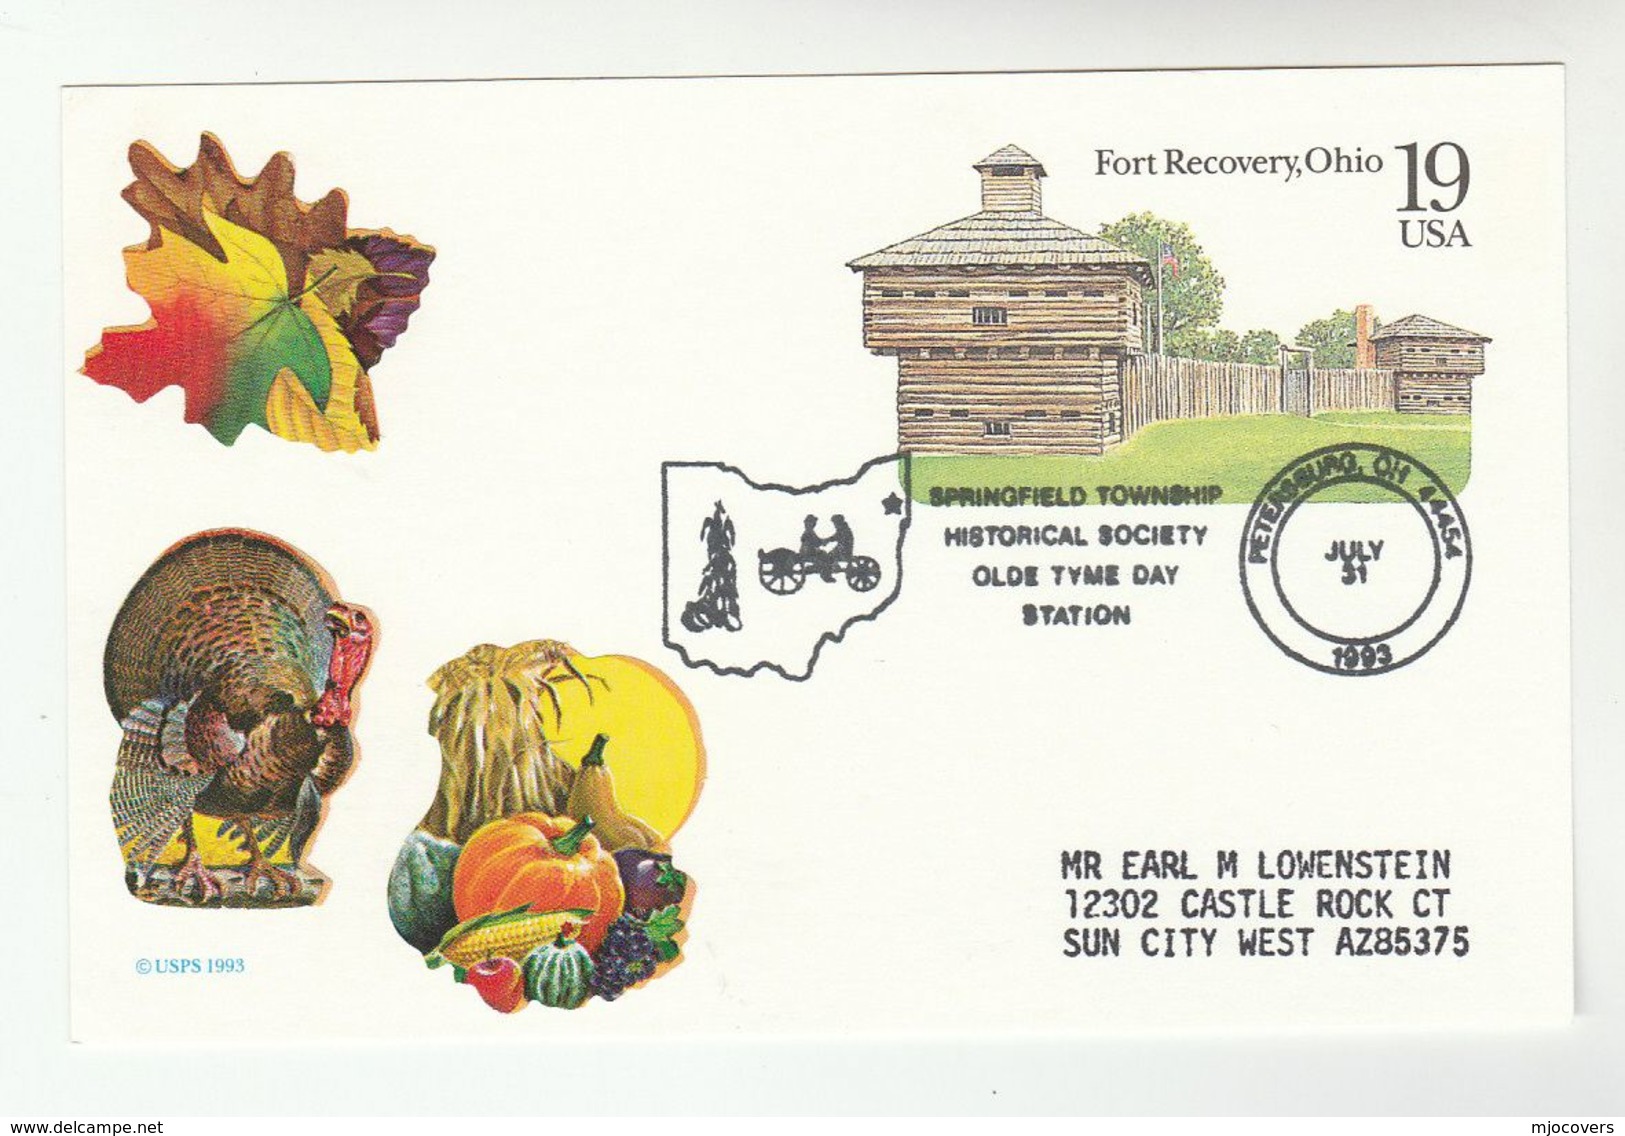 1993 USA Spingfield Township HISTORICAL SOC EVENT Fort Recovery POSTAL STATIONERY CARD Turkey Bird Label Cover Stamps - Militaria